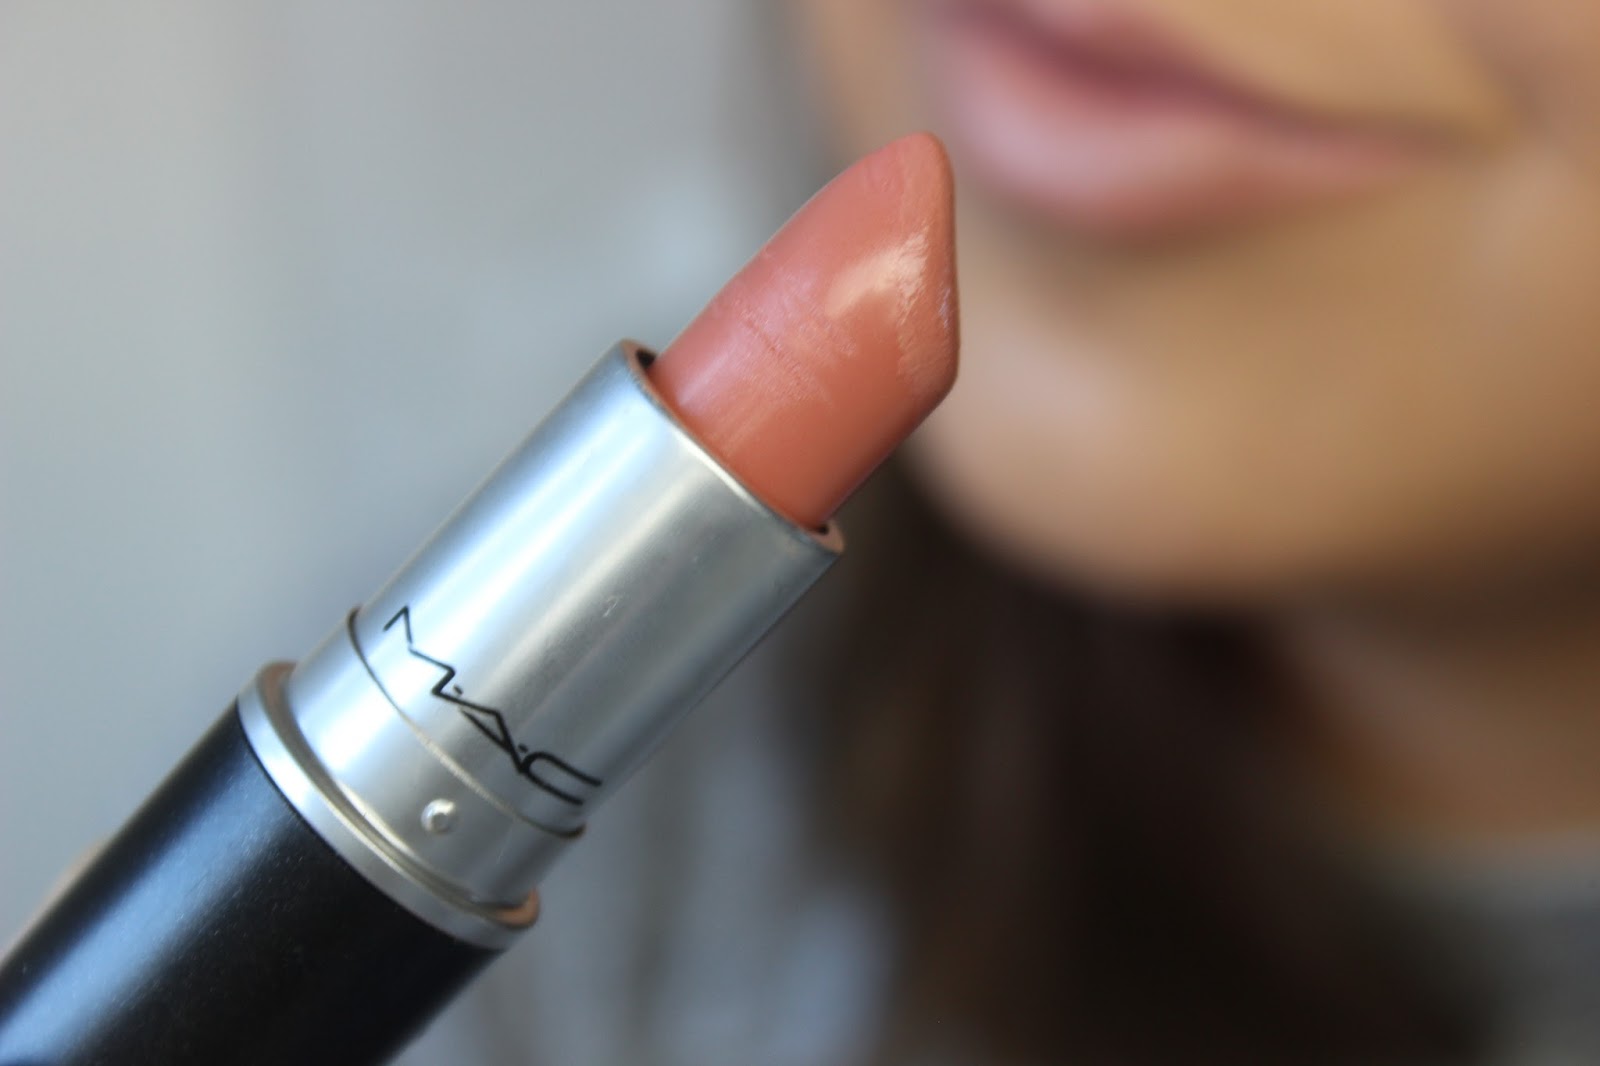 MAC Pure Zen is amongst one of my latest MAC/lipstick purchases to join my ...